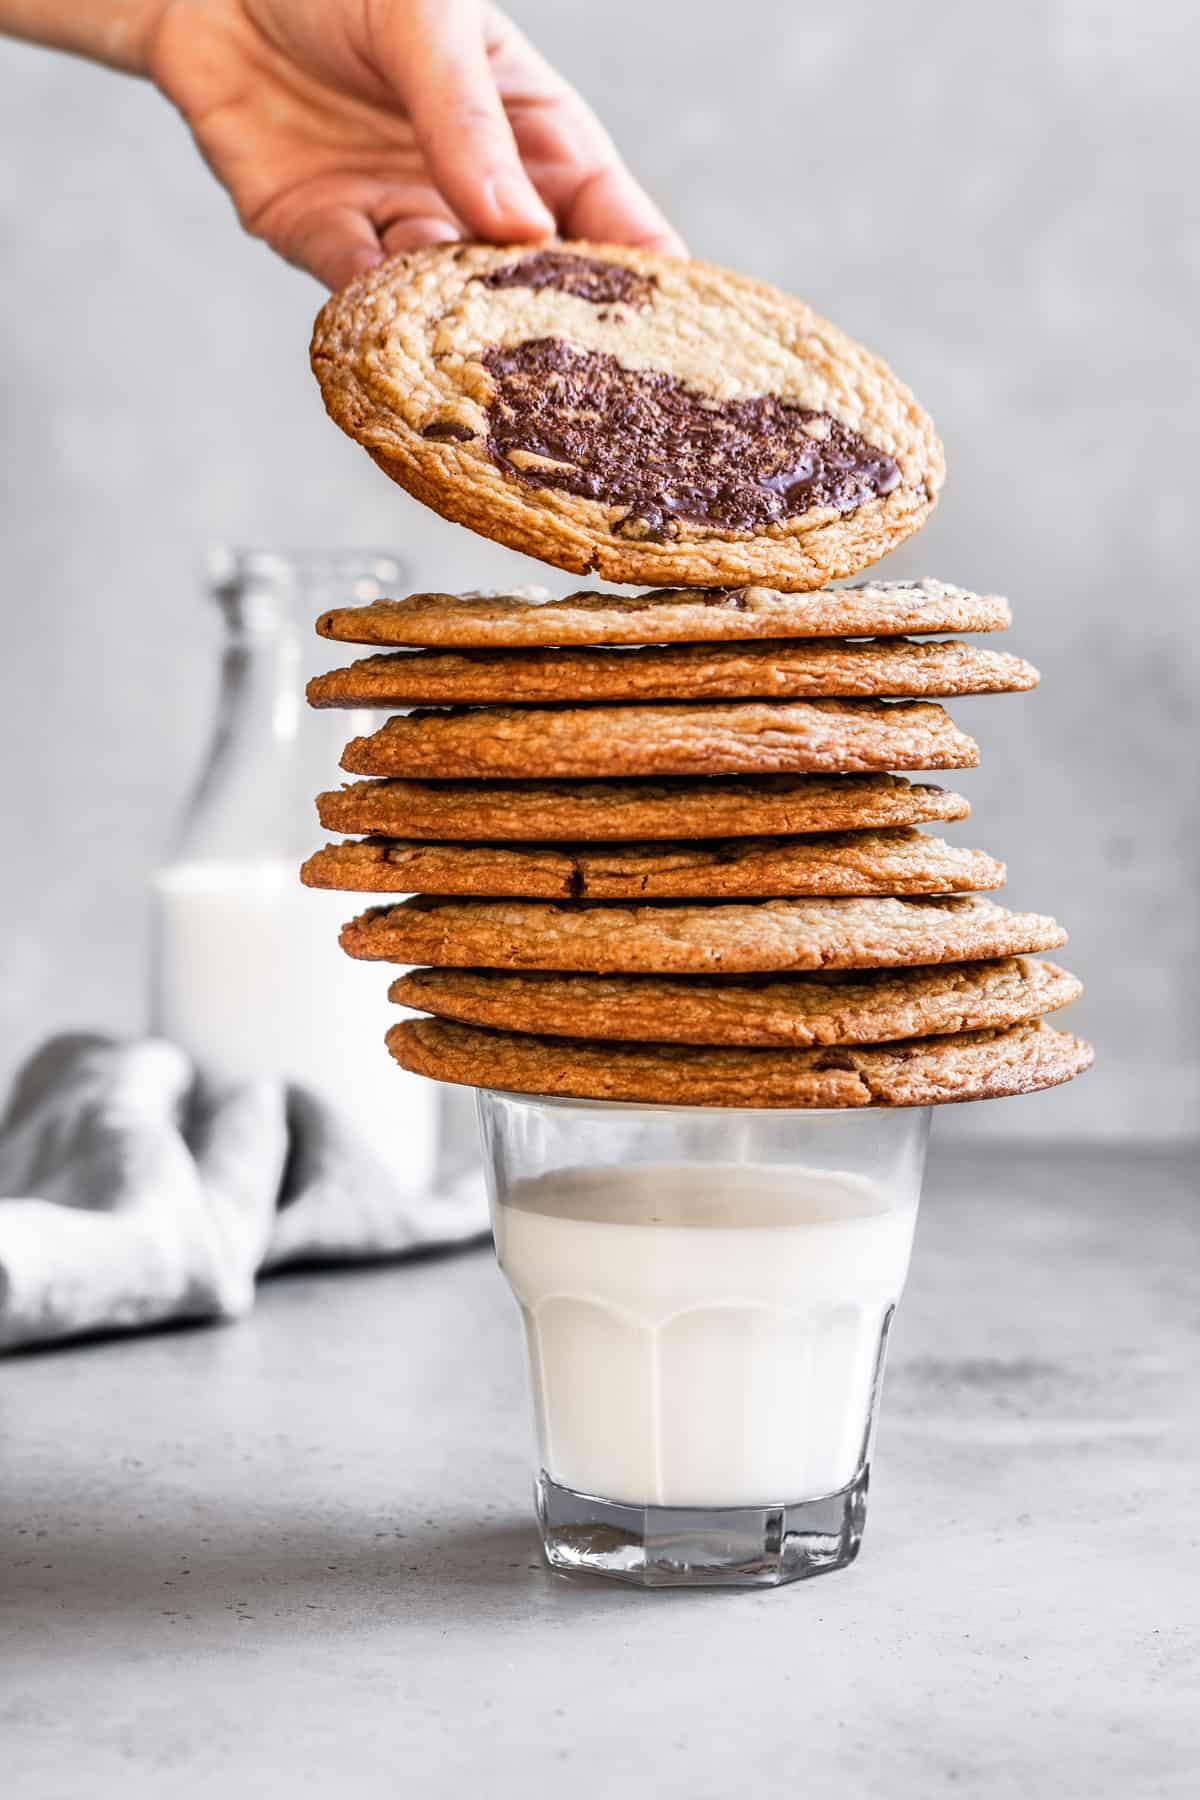 Giant chocolate chip cookie recipe using the pan bang method.